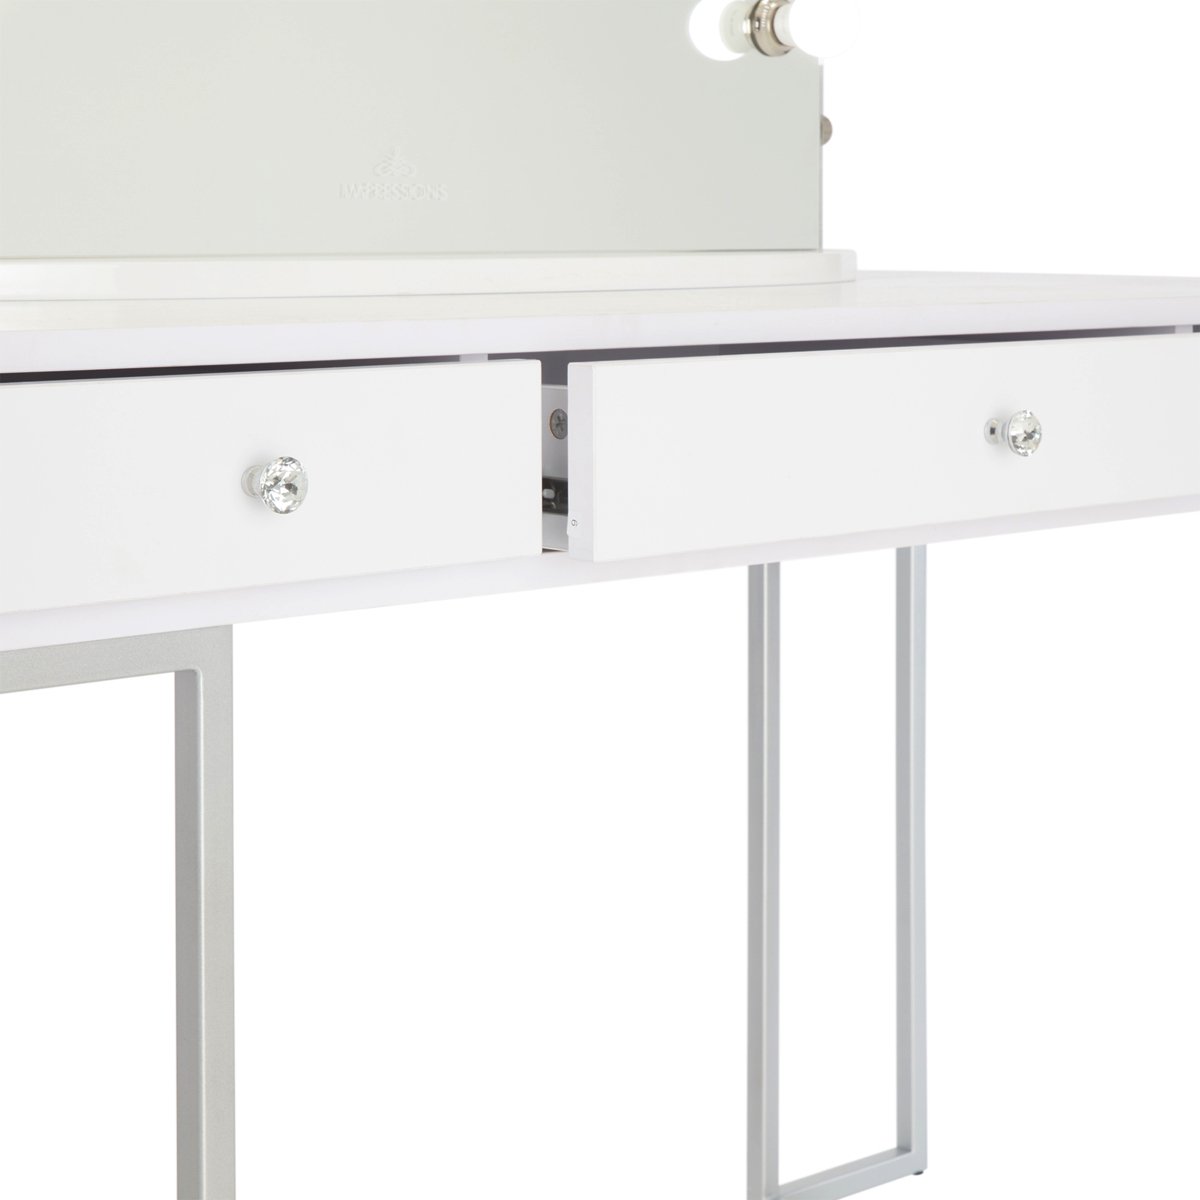 Impressions Vanity Premium Makeup Desk, Celeste Modern Table with 3 Drawers and Crystal Knobs, Perfect for Bedroom Decore (White) - image 5 of 6